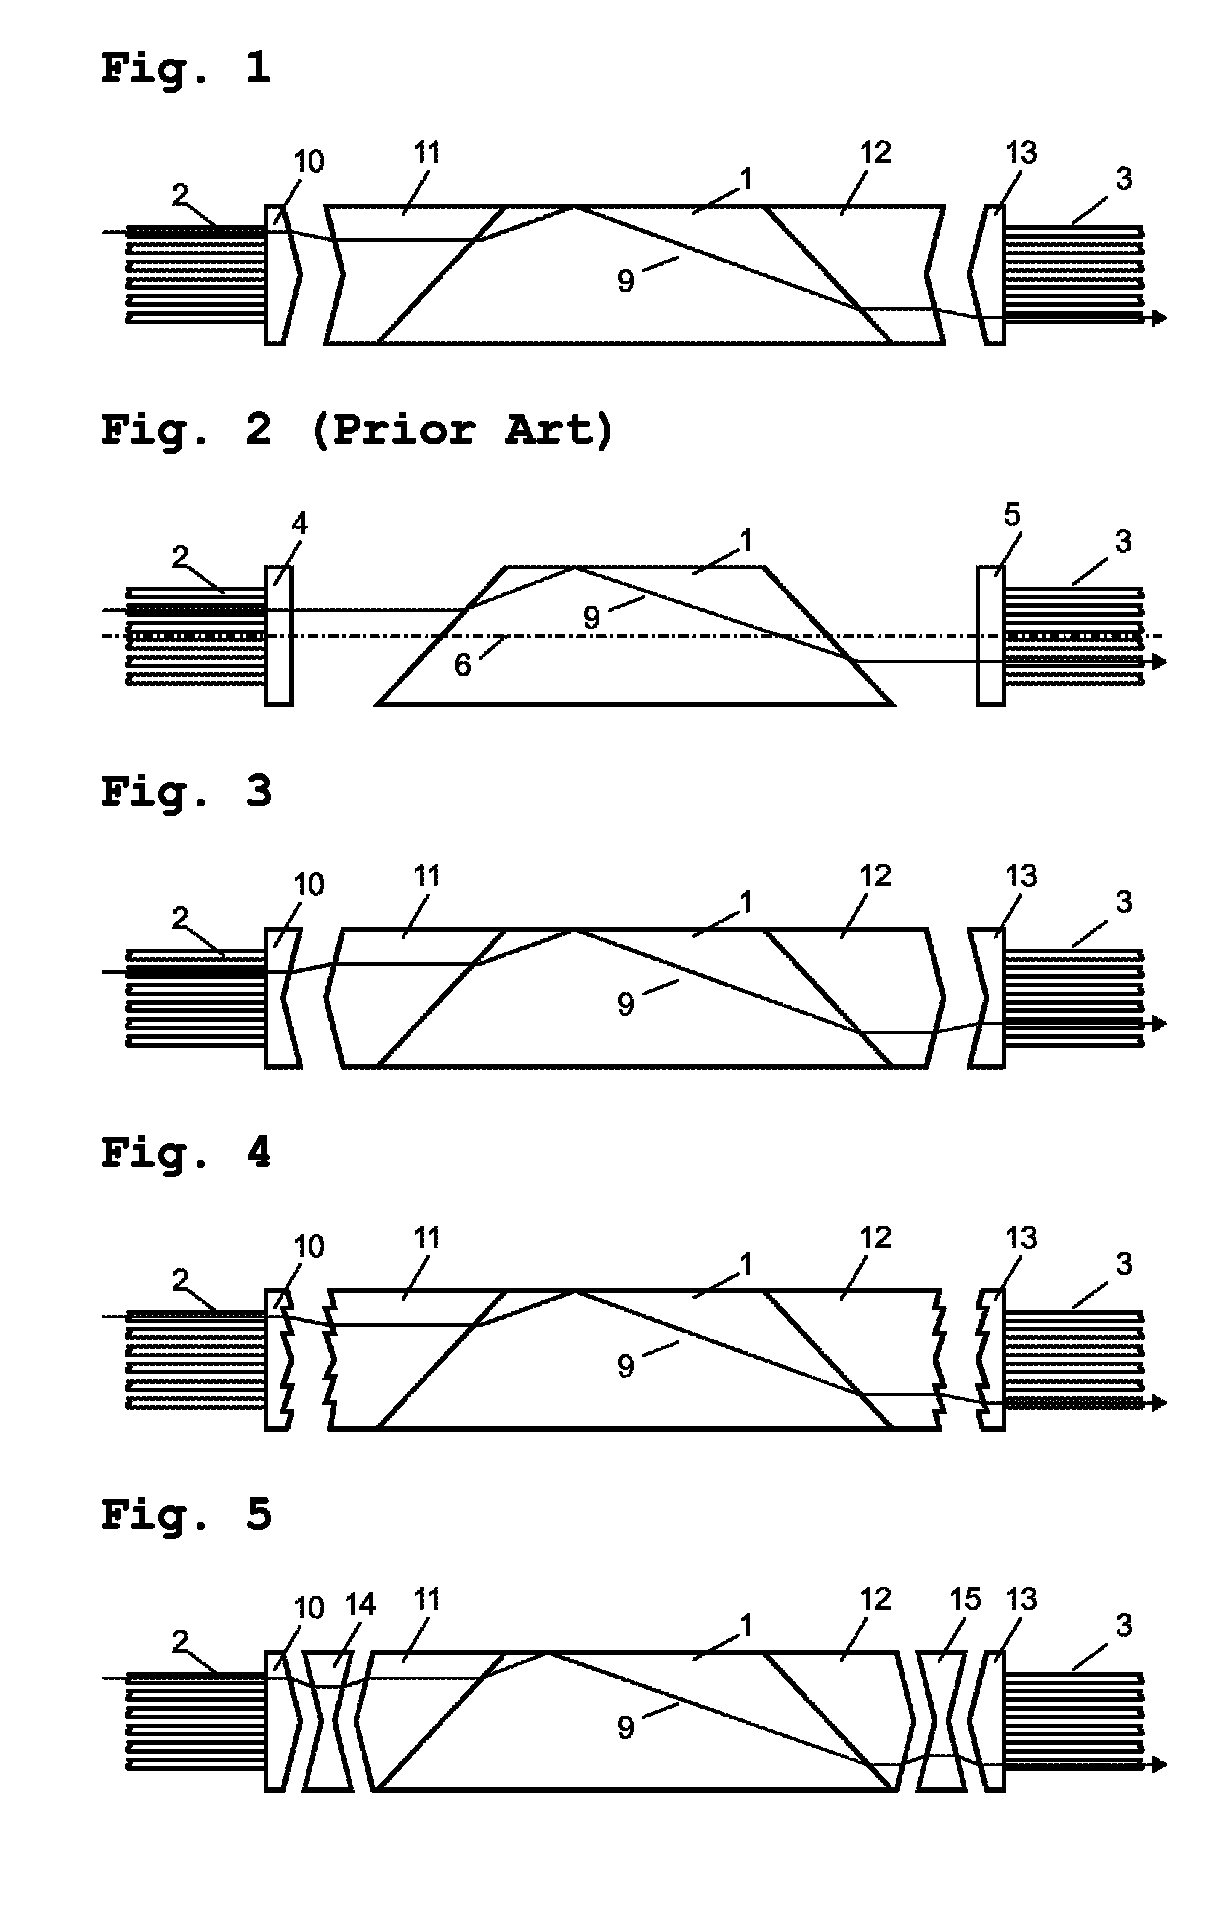 Multi-channel optical rotary transmission device with high return loss